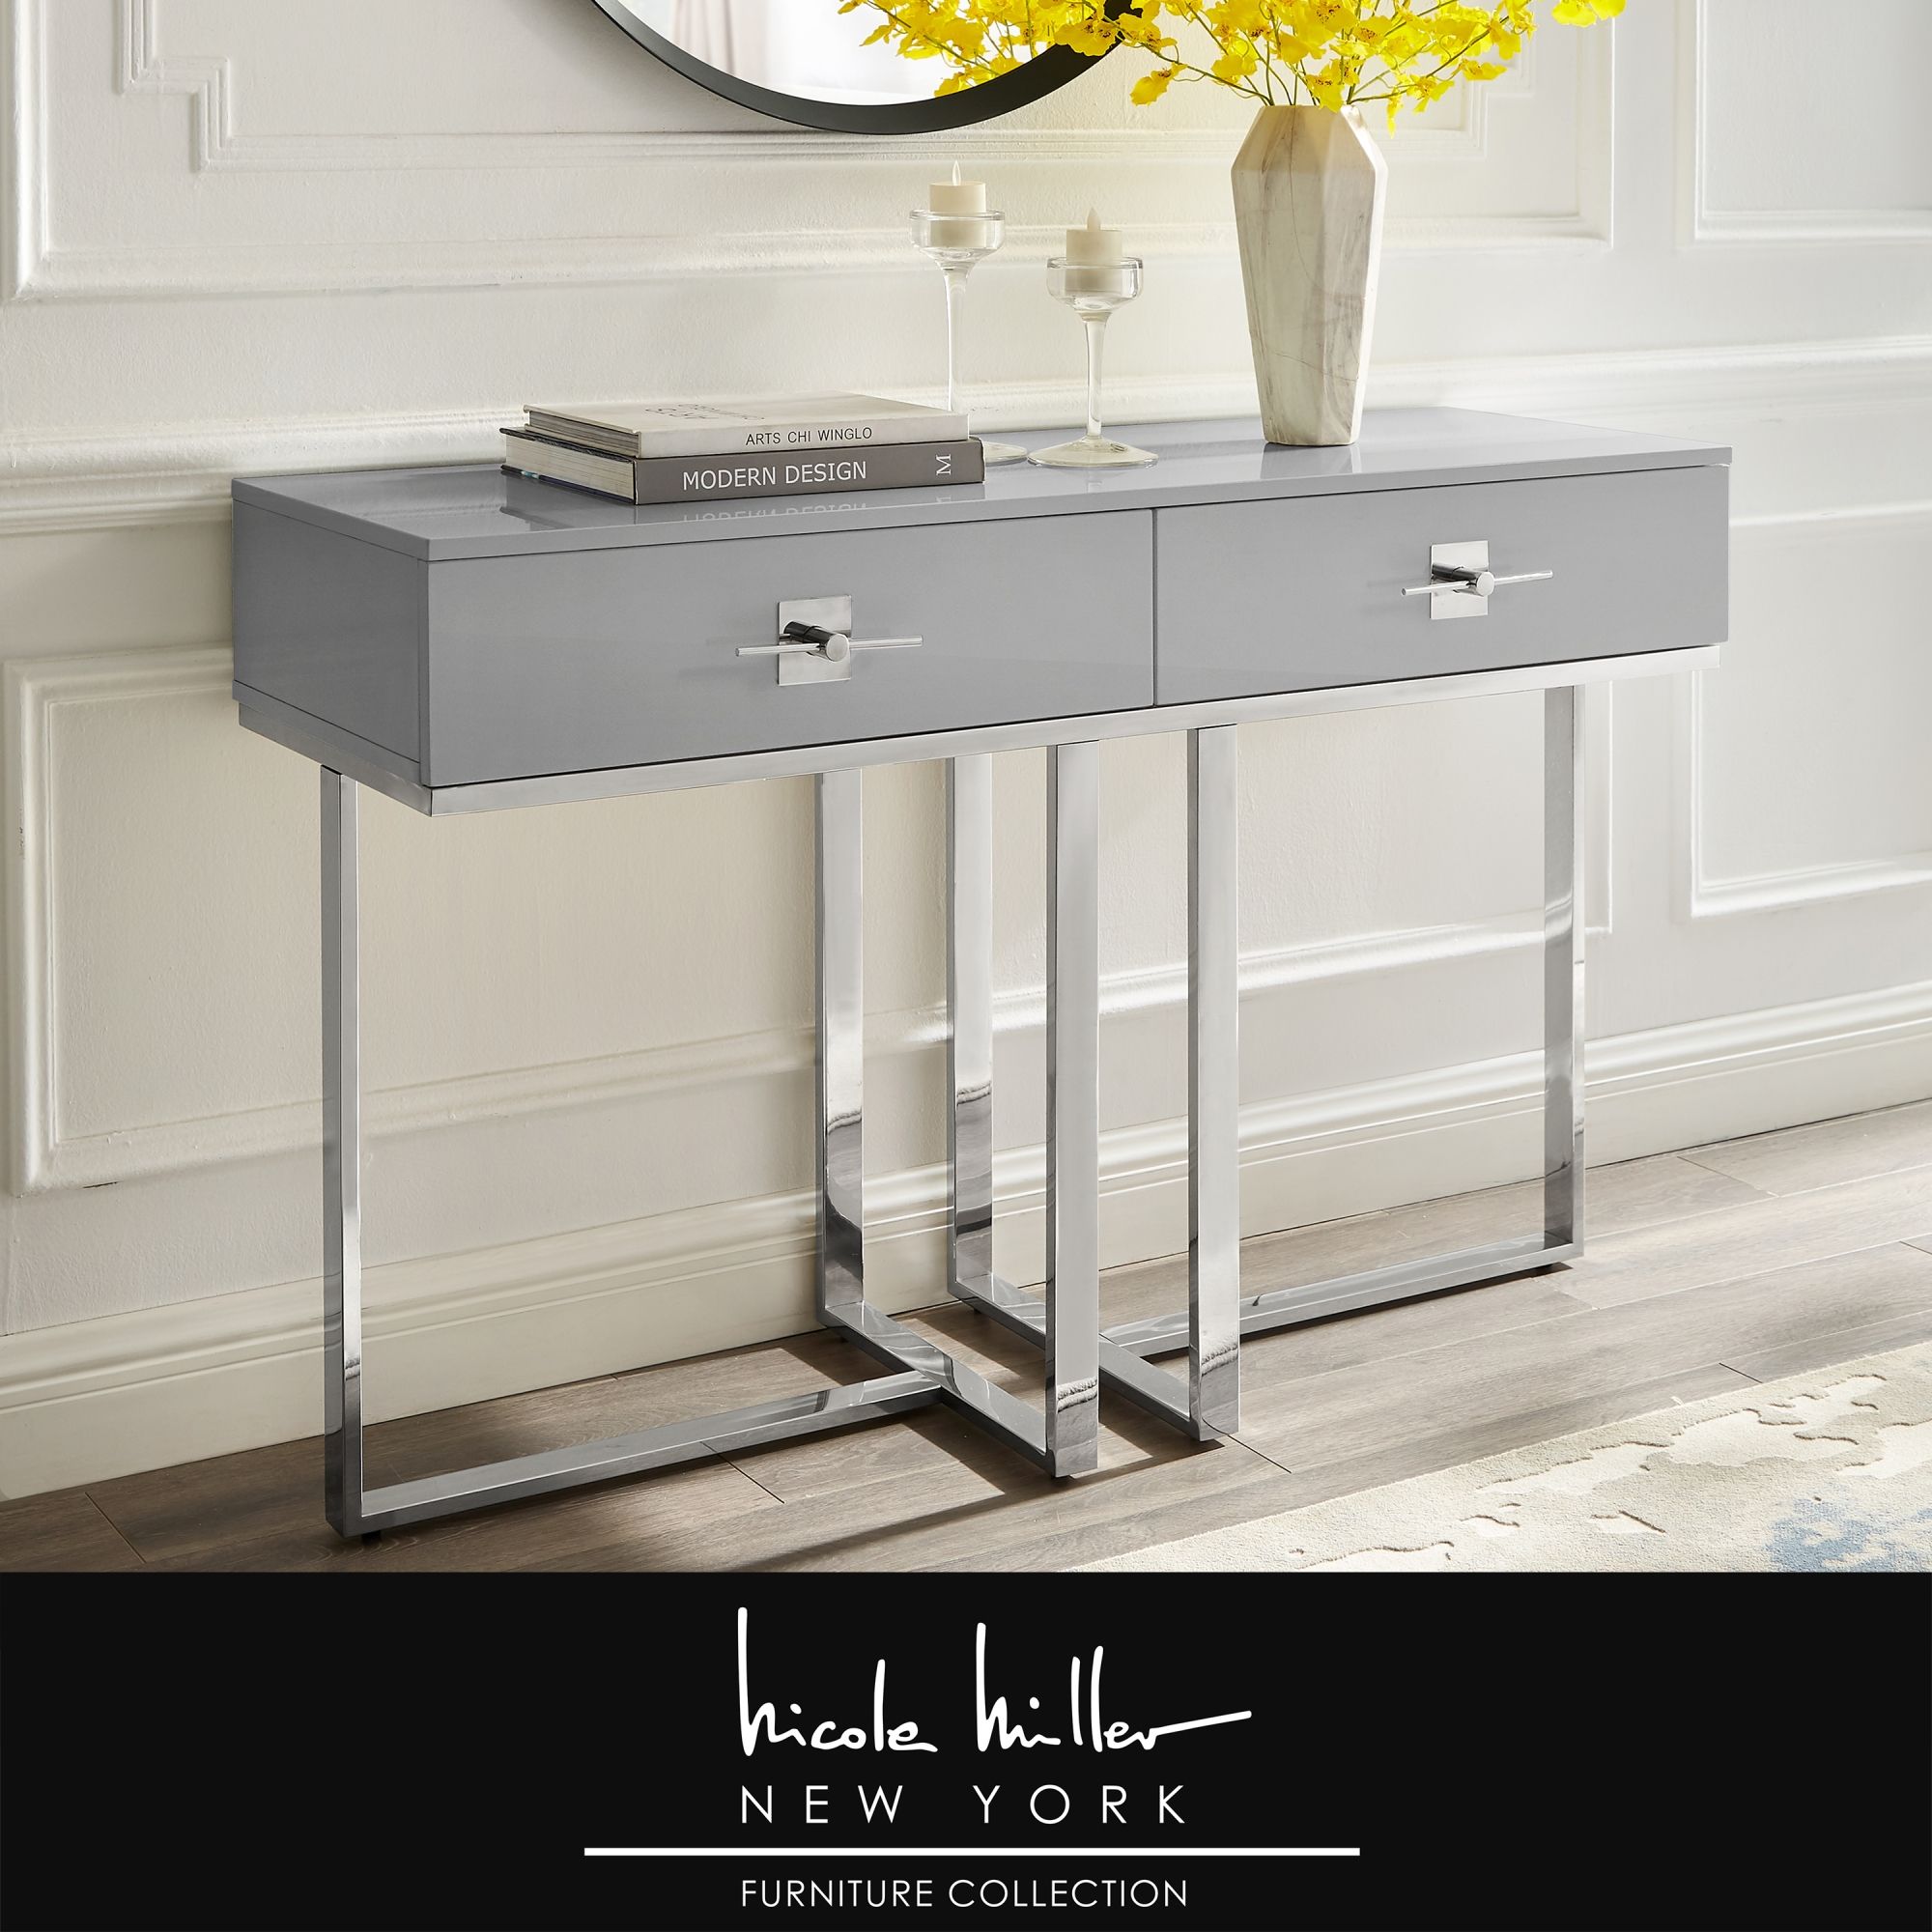 Nicole Miller Meli Console Table 2 Drawers Hight Gloss Lacquer Finish Within Gray Wood Black Steel Console Tables (View 6 of 20)